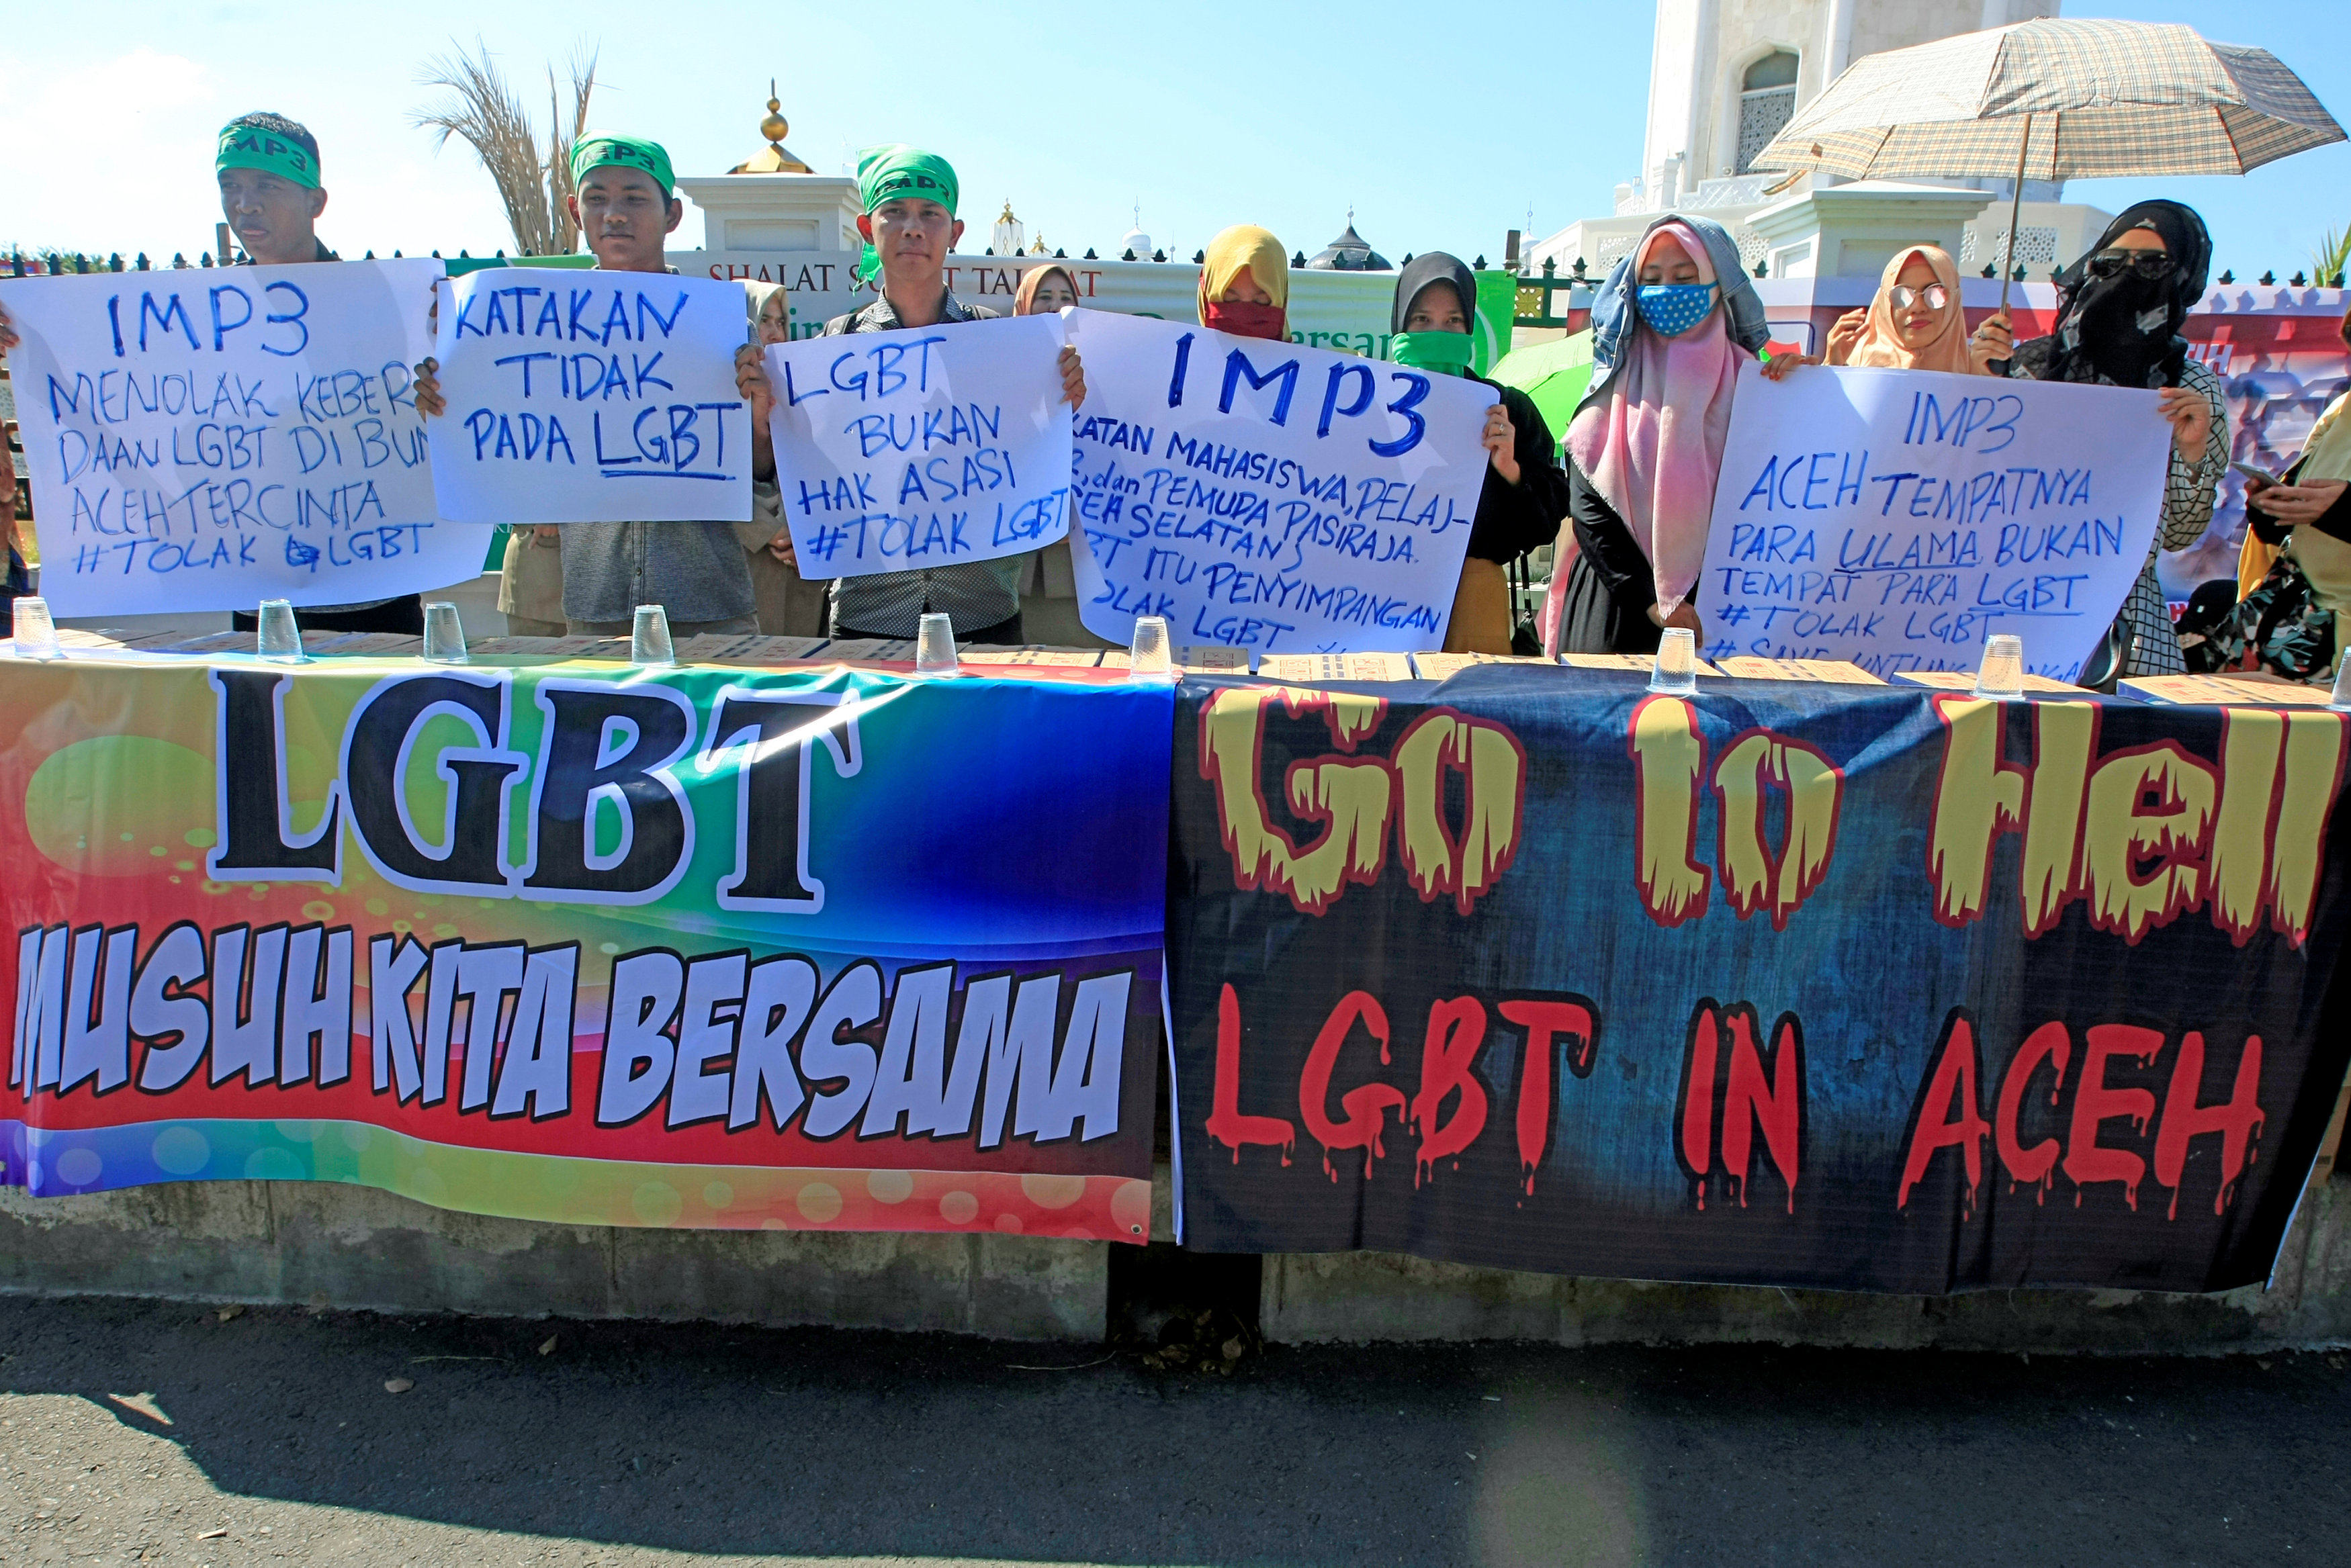 Muslim protesters hold an anti-LGBT rally outside a mosque in the provincial capital Banda Aceh, Aceh province in Indonesia in 2018. The LGBT community in Indonesia has faced a worsening climate of intolerance. Photo: Reuters